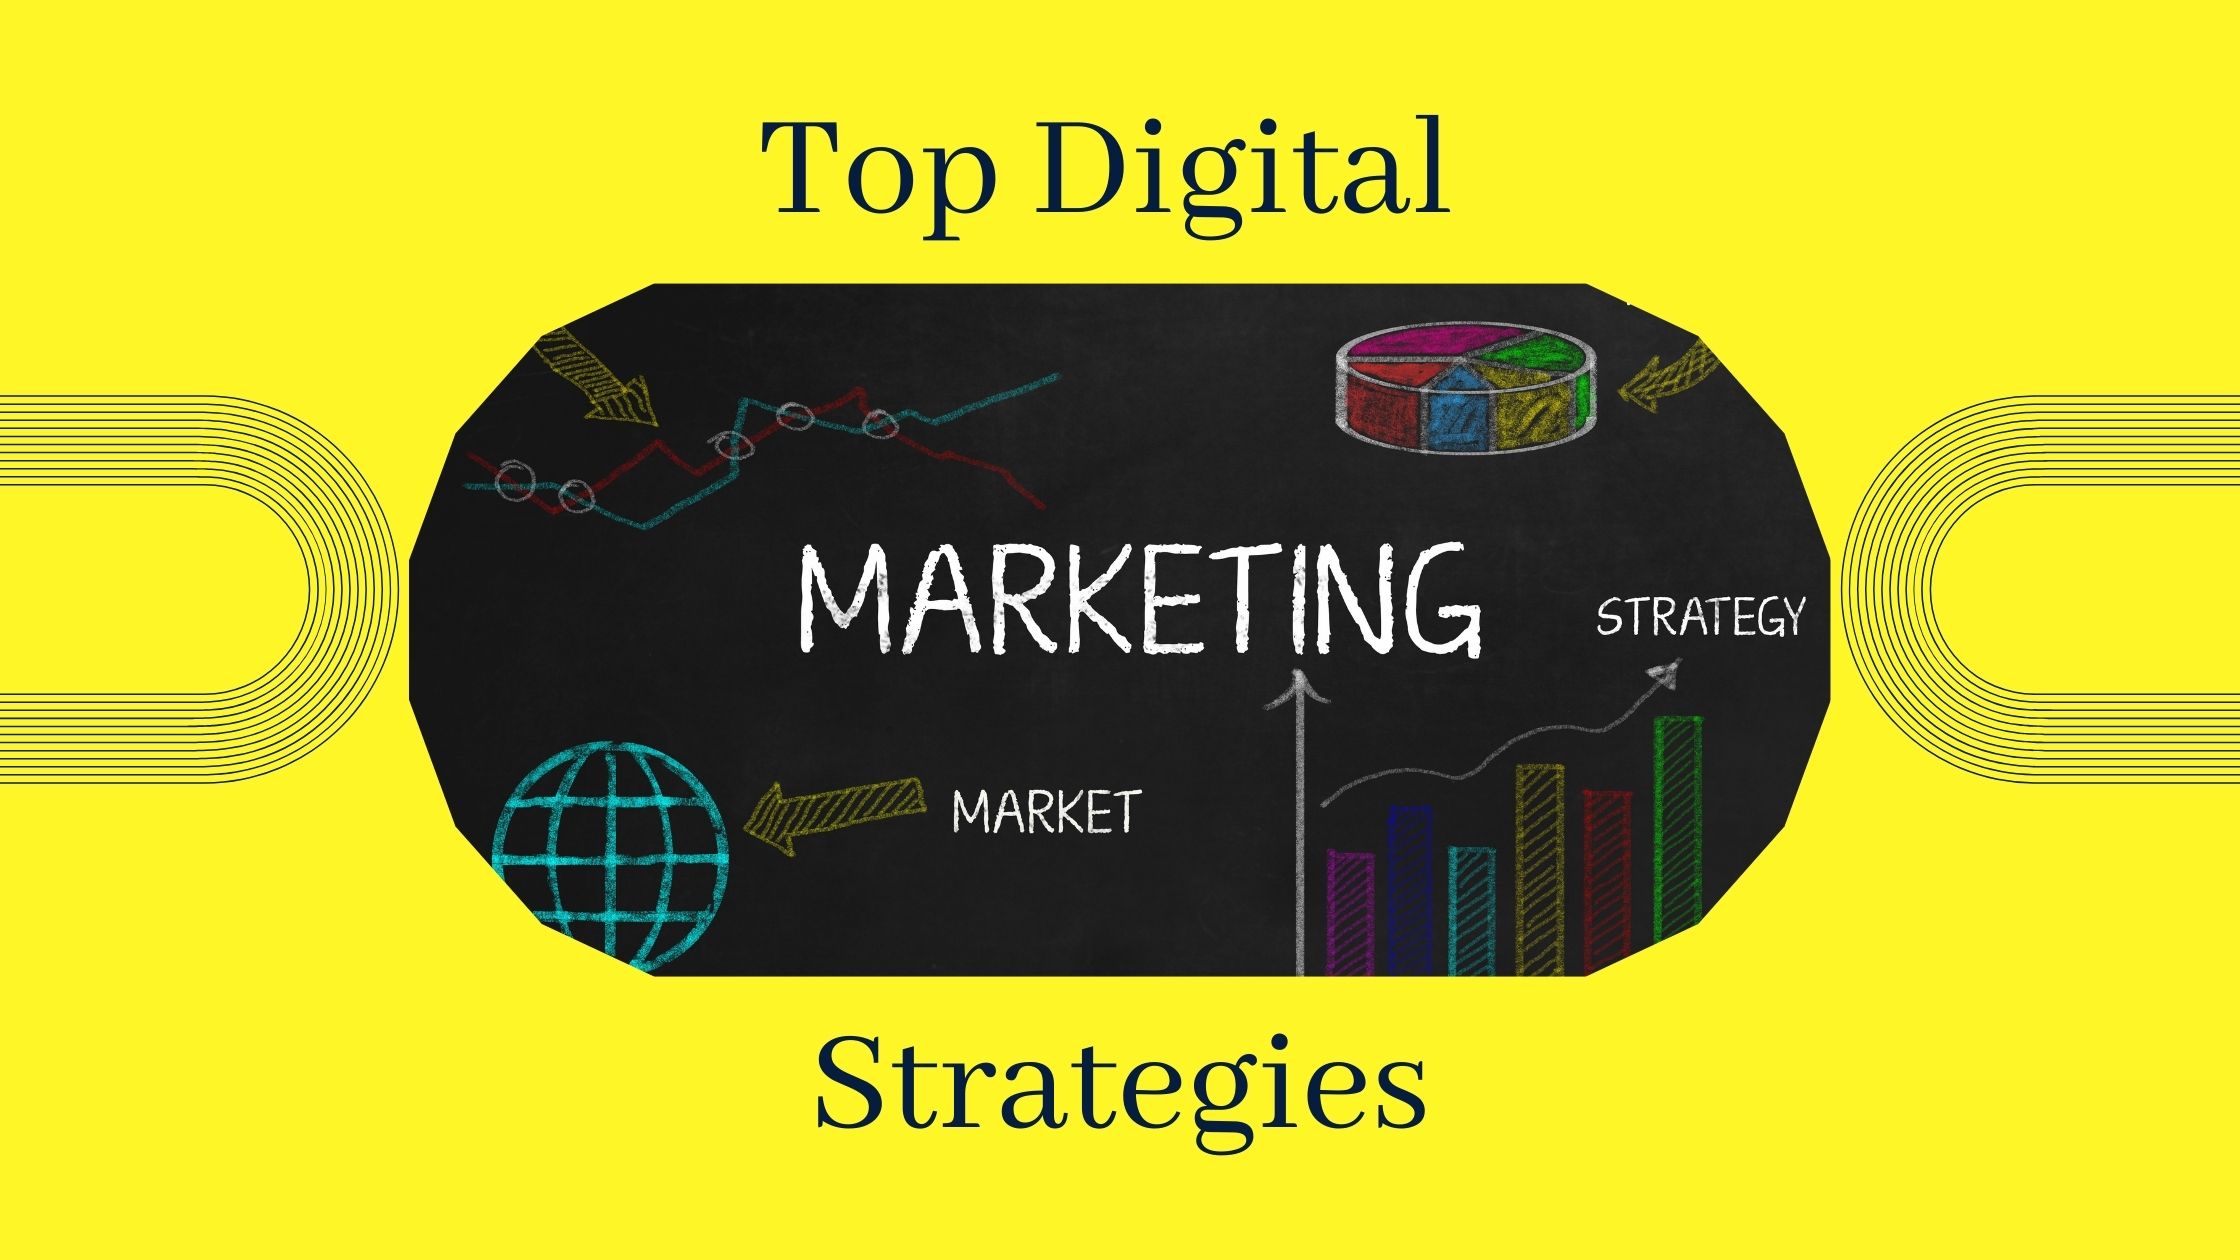 In this blog, you'll discover the top digital marketing strategies according to marketers around the world.